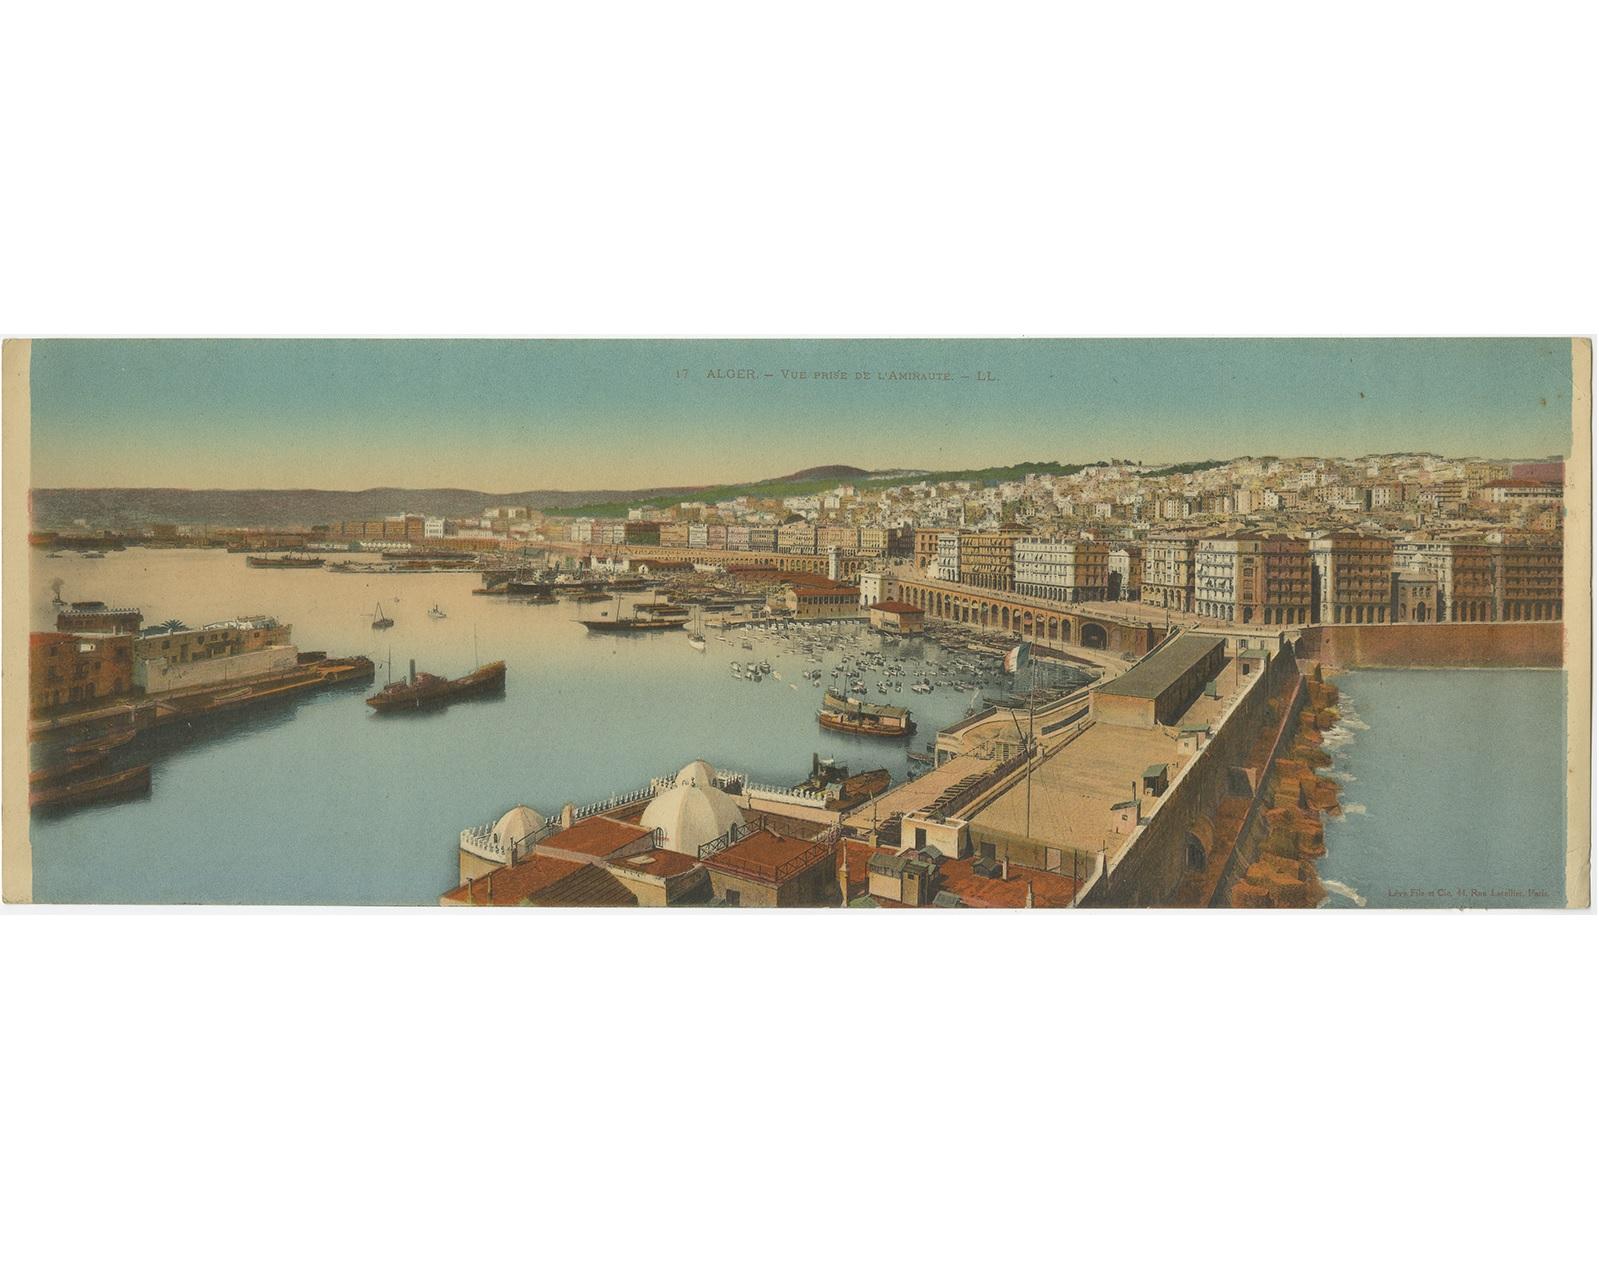 Set of three large panoramic postcards, circa 1920. It shows Béjaïa (former Bougie), Algiers and Lugano. Published by Lévy (Bougie & Algiers) and Paul Bende (Lugano).